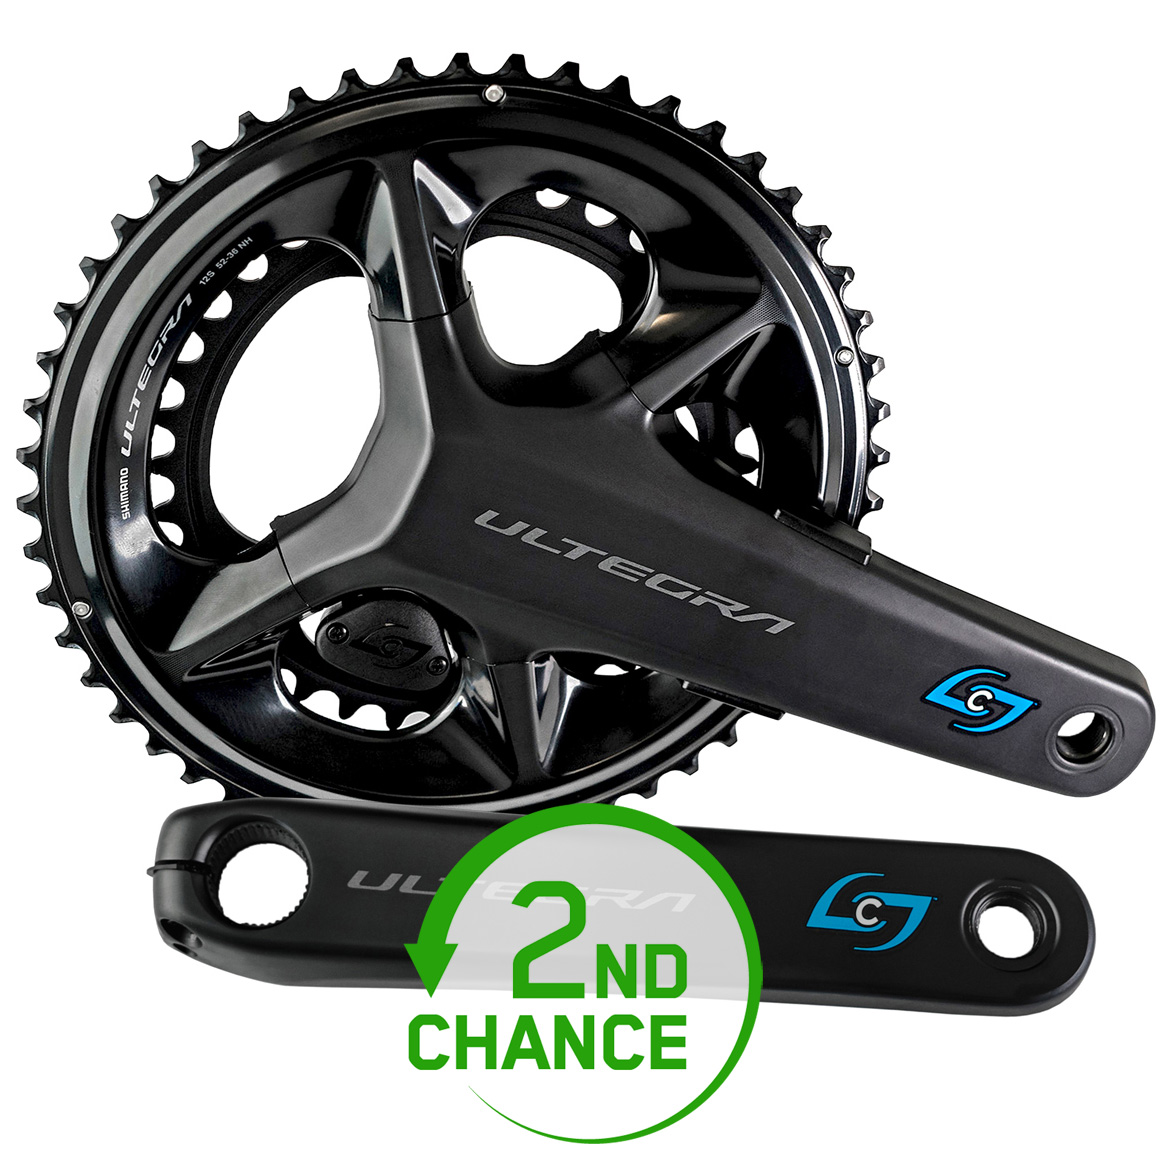 Productfoto van Stages Cycling Power LR Powermeter | Crankset by Shimano - Ultegra R8100 | 2x12-speed - black - 2nd Choice